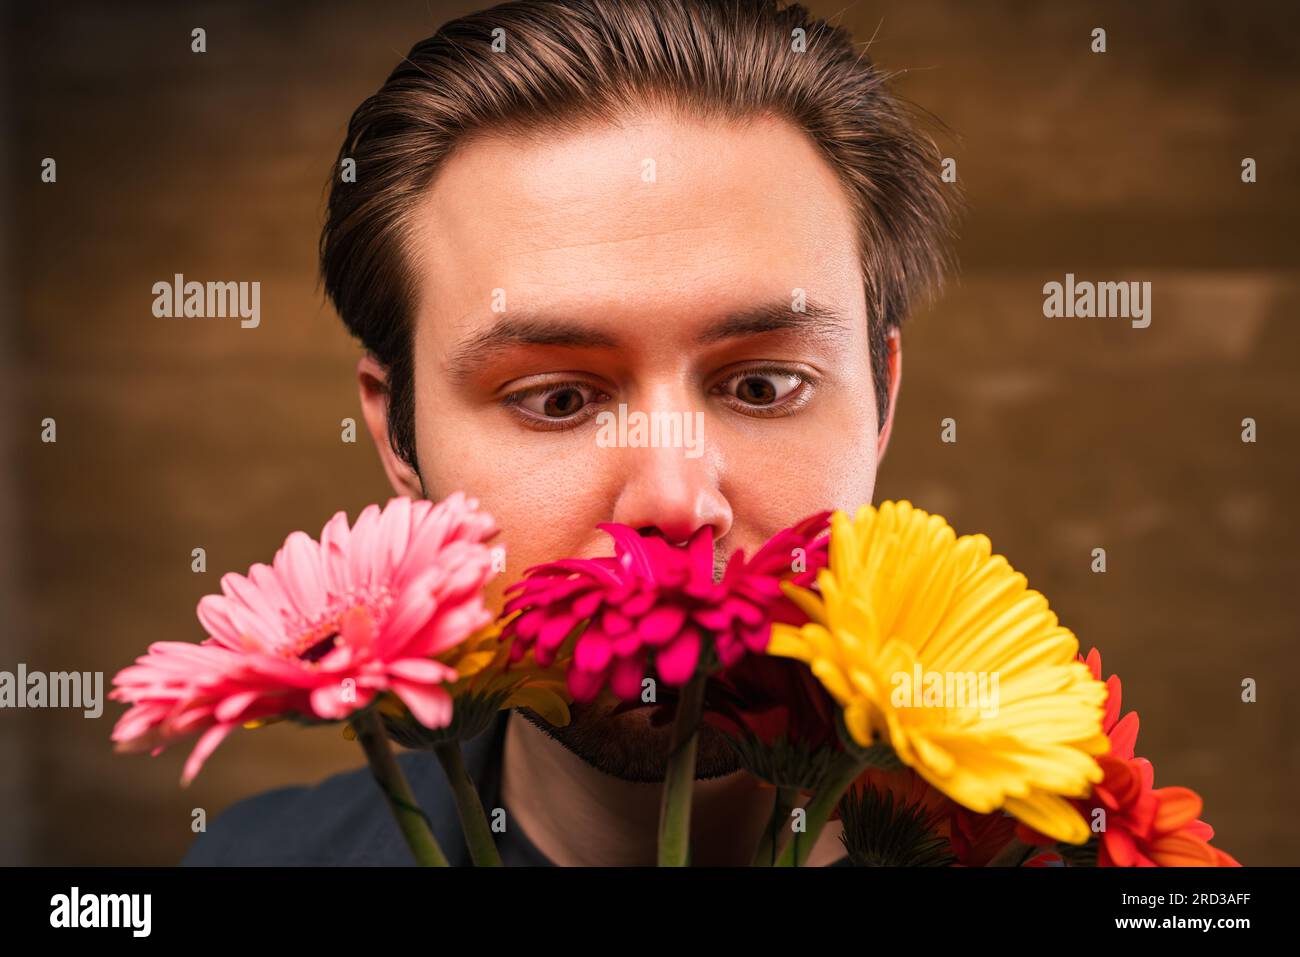 Young man smell flowers portrait Stock Photo